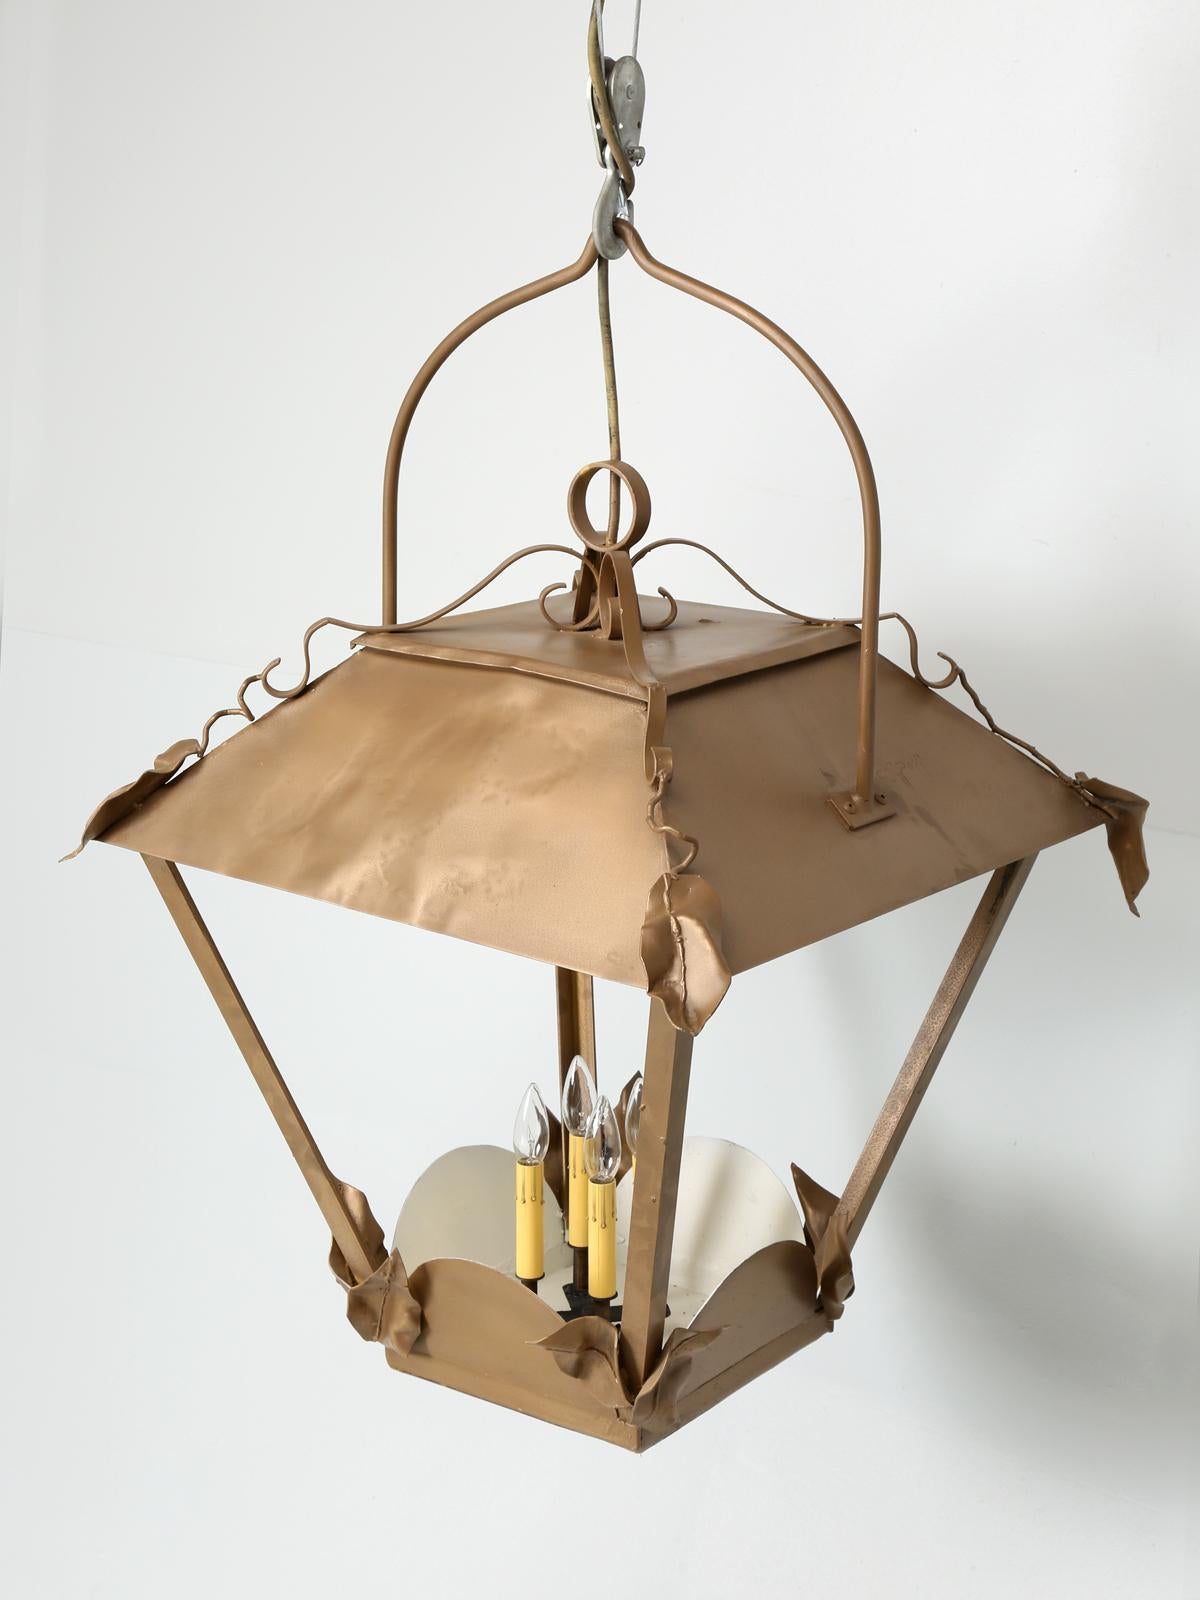 Vintage French lantern in an unusually large size with a leaf motif. The lantern was probably made during the 1950’s and has (4) new American candelabra sockets, along with replaced wiring. The exterior is cold plated bronze and there is no glass,